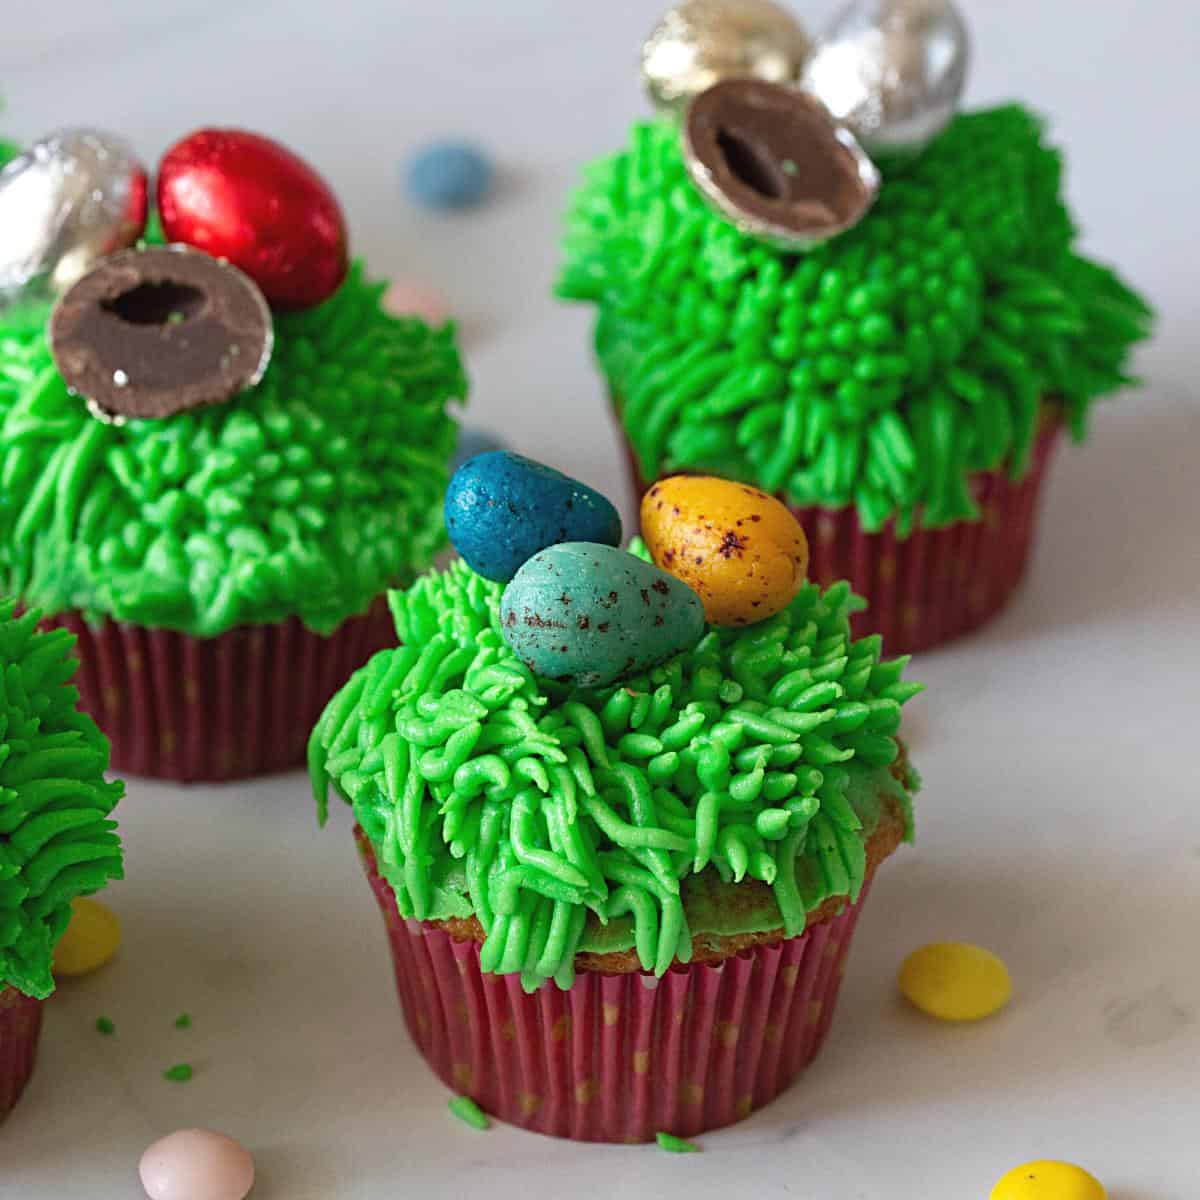 Cupcakes with green grass frosting and eater eggs.